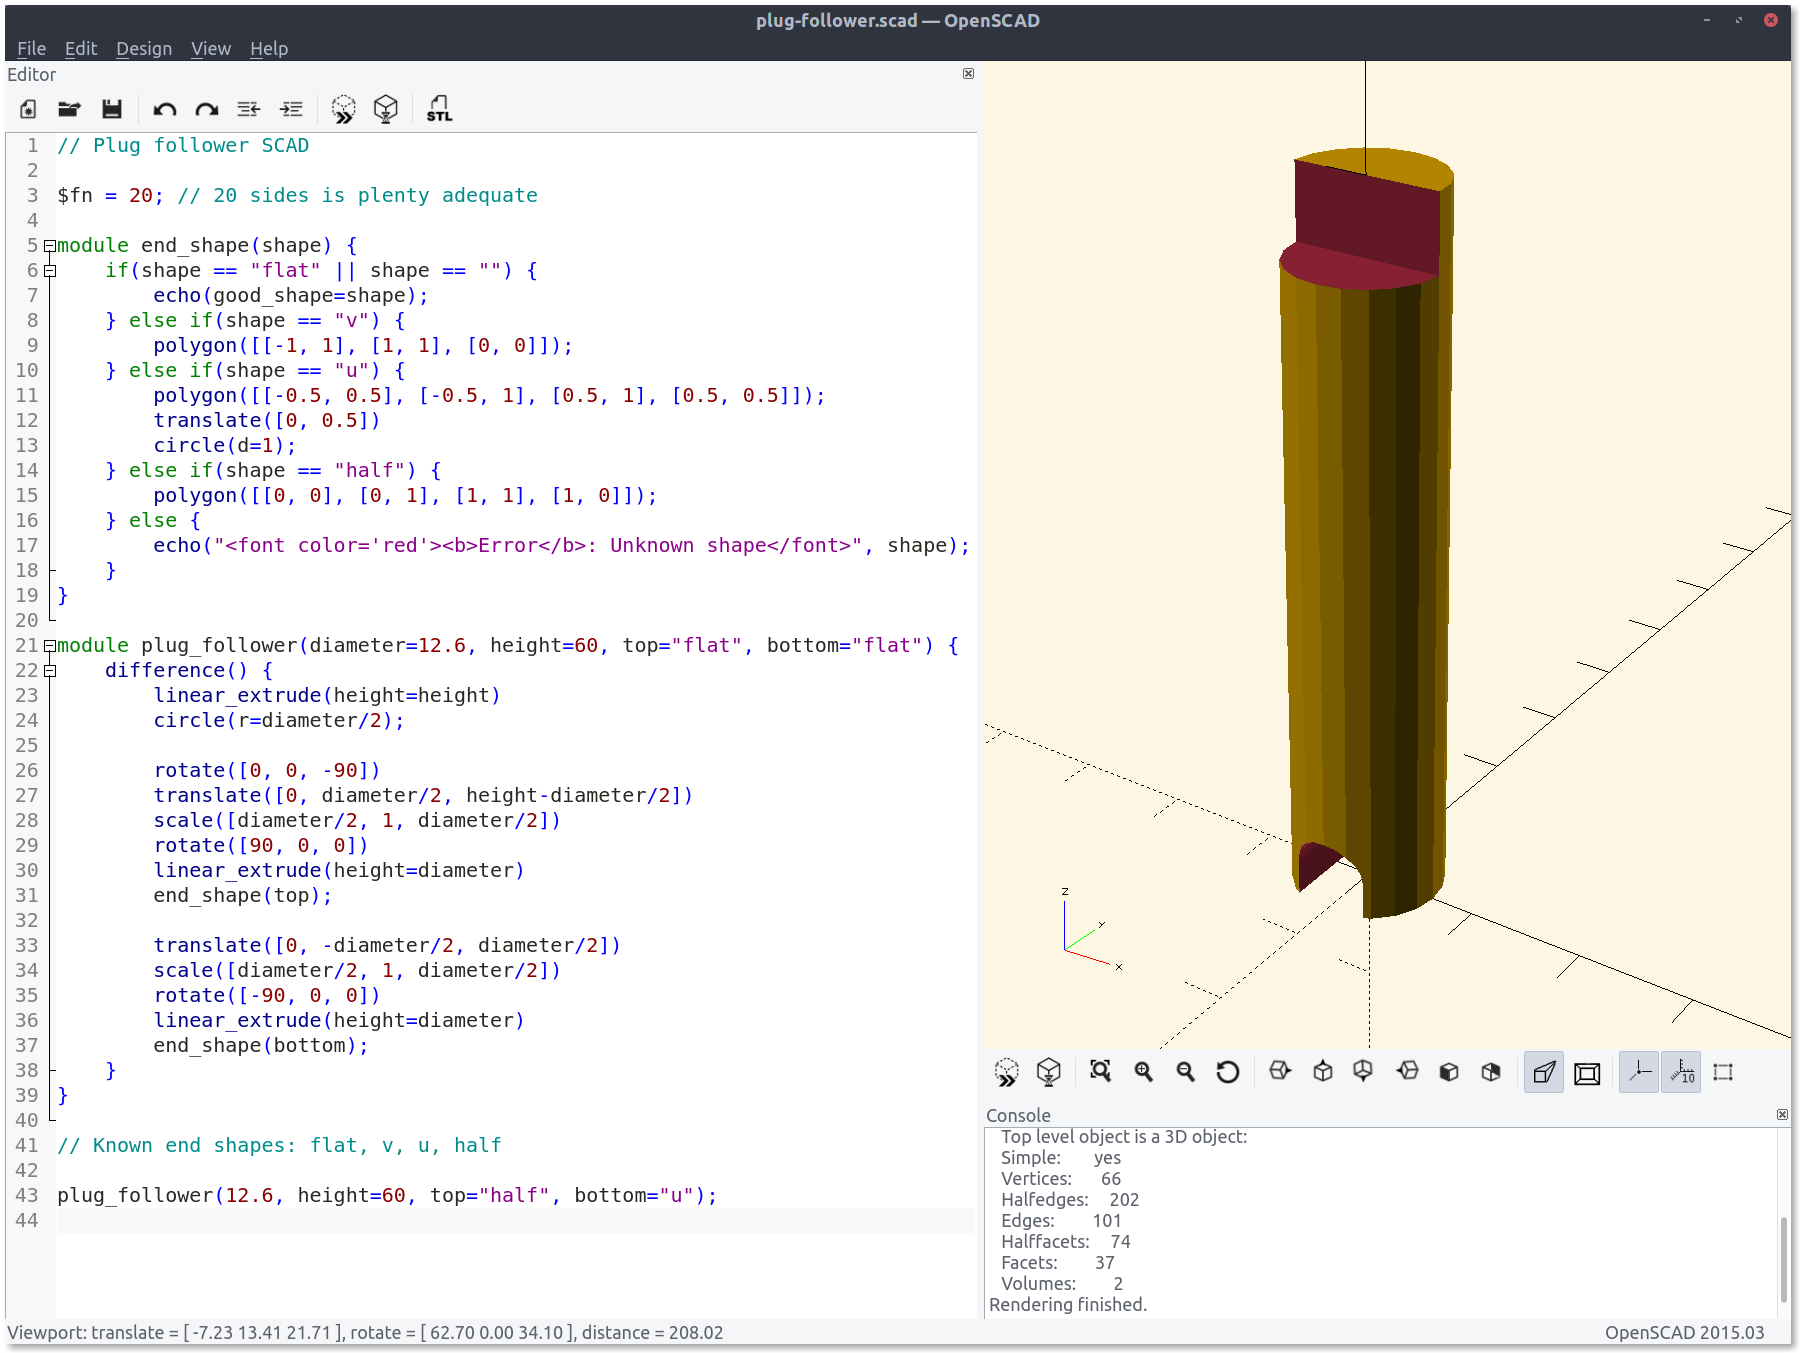 OpenSCAD interface, showing a render of a plug follower and the code that generates it